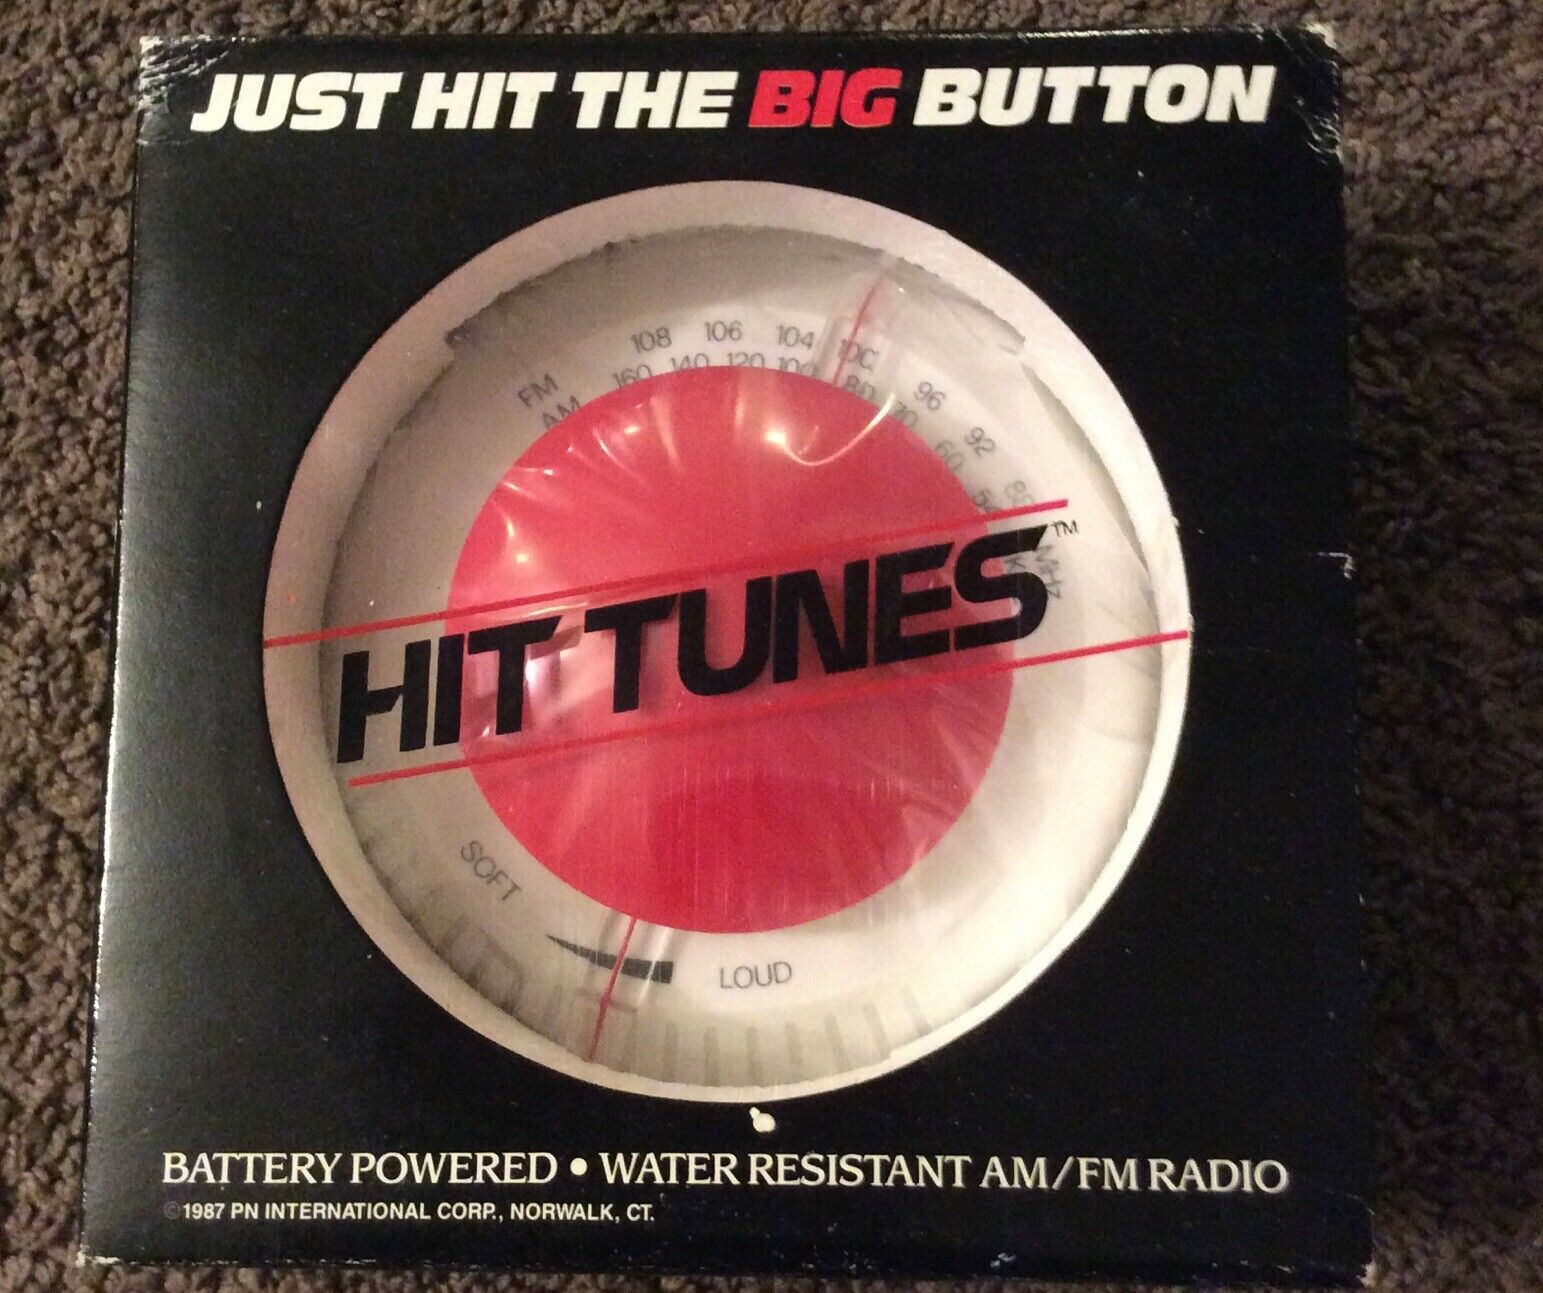 Vintage Hit Tunes Wall Radio Push Button 1987 by PN International -Corp